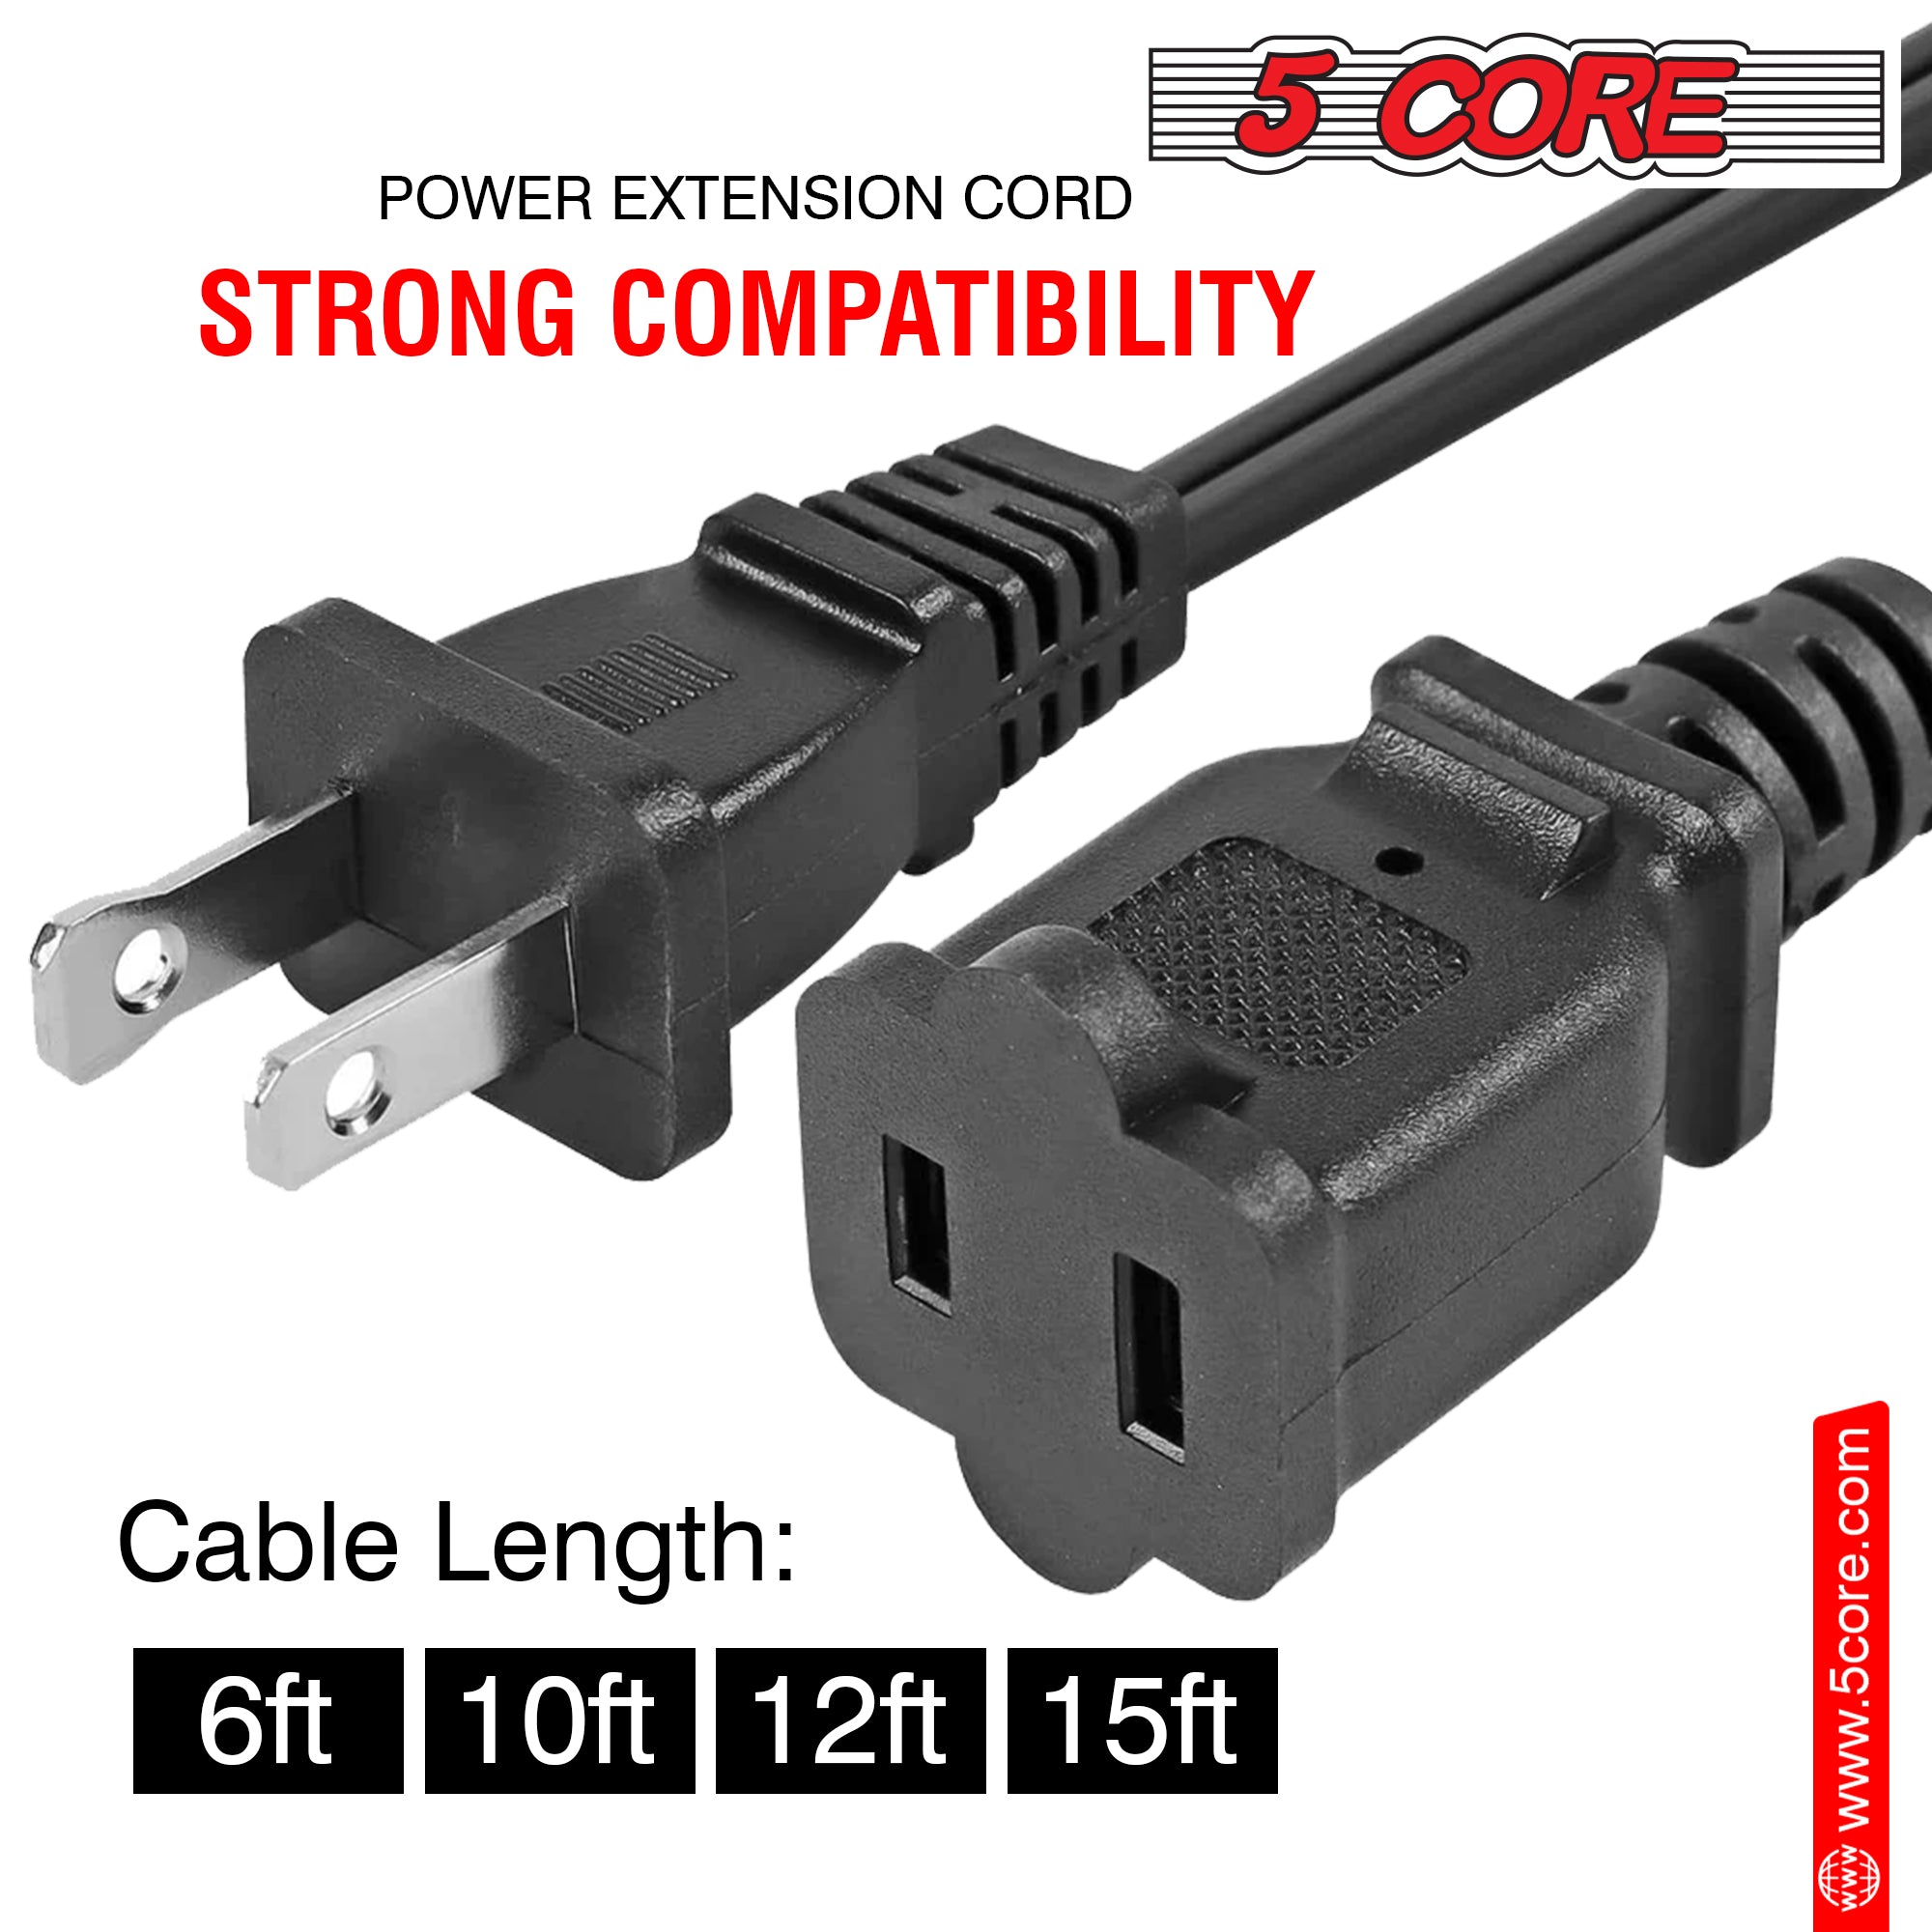 5 Core AC Power Cord 12 Ft • US Polarized Male to Female 2 Prong Extension Adapter 16AWG/2C 125V 13A